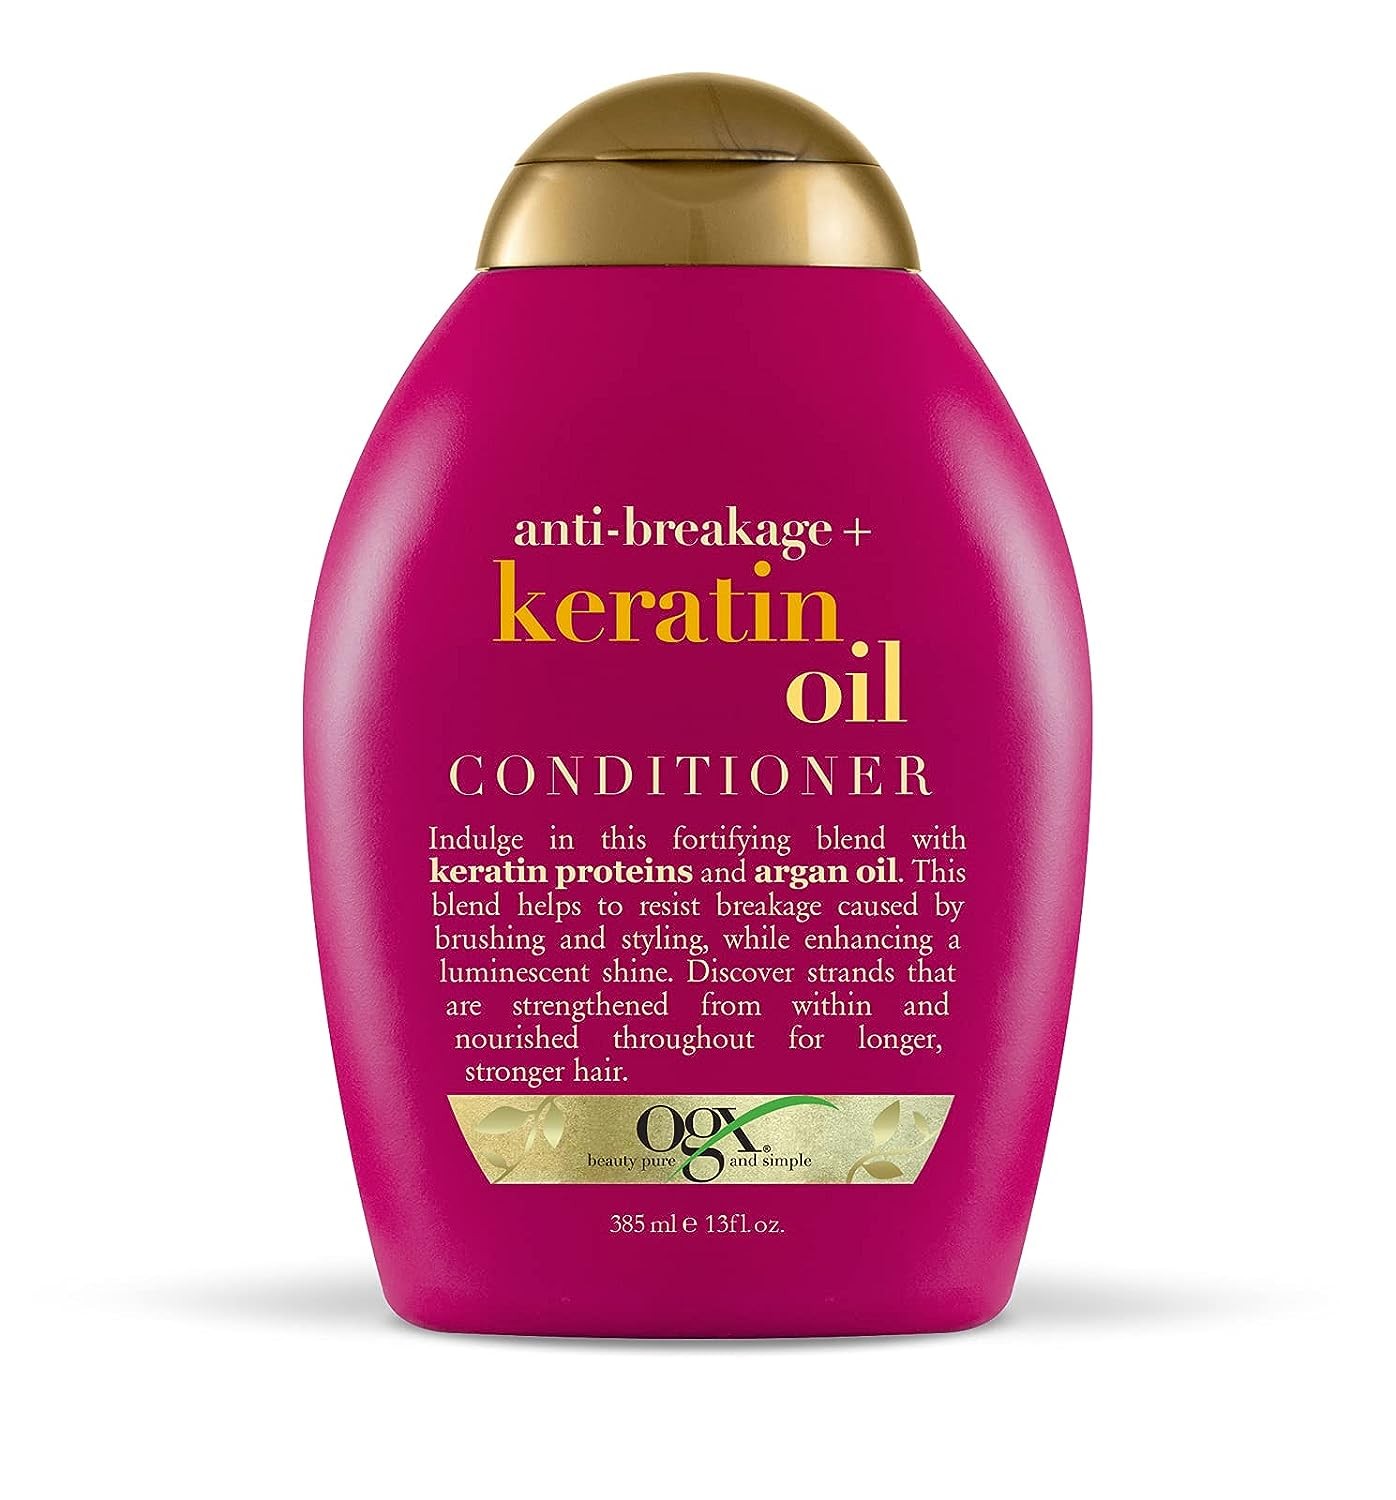 Ogx Conditioner Keratin Oil 13 Ounce (384ml)